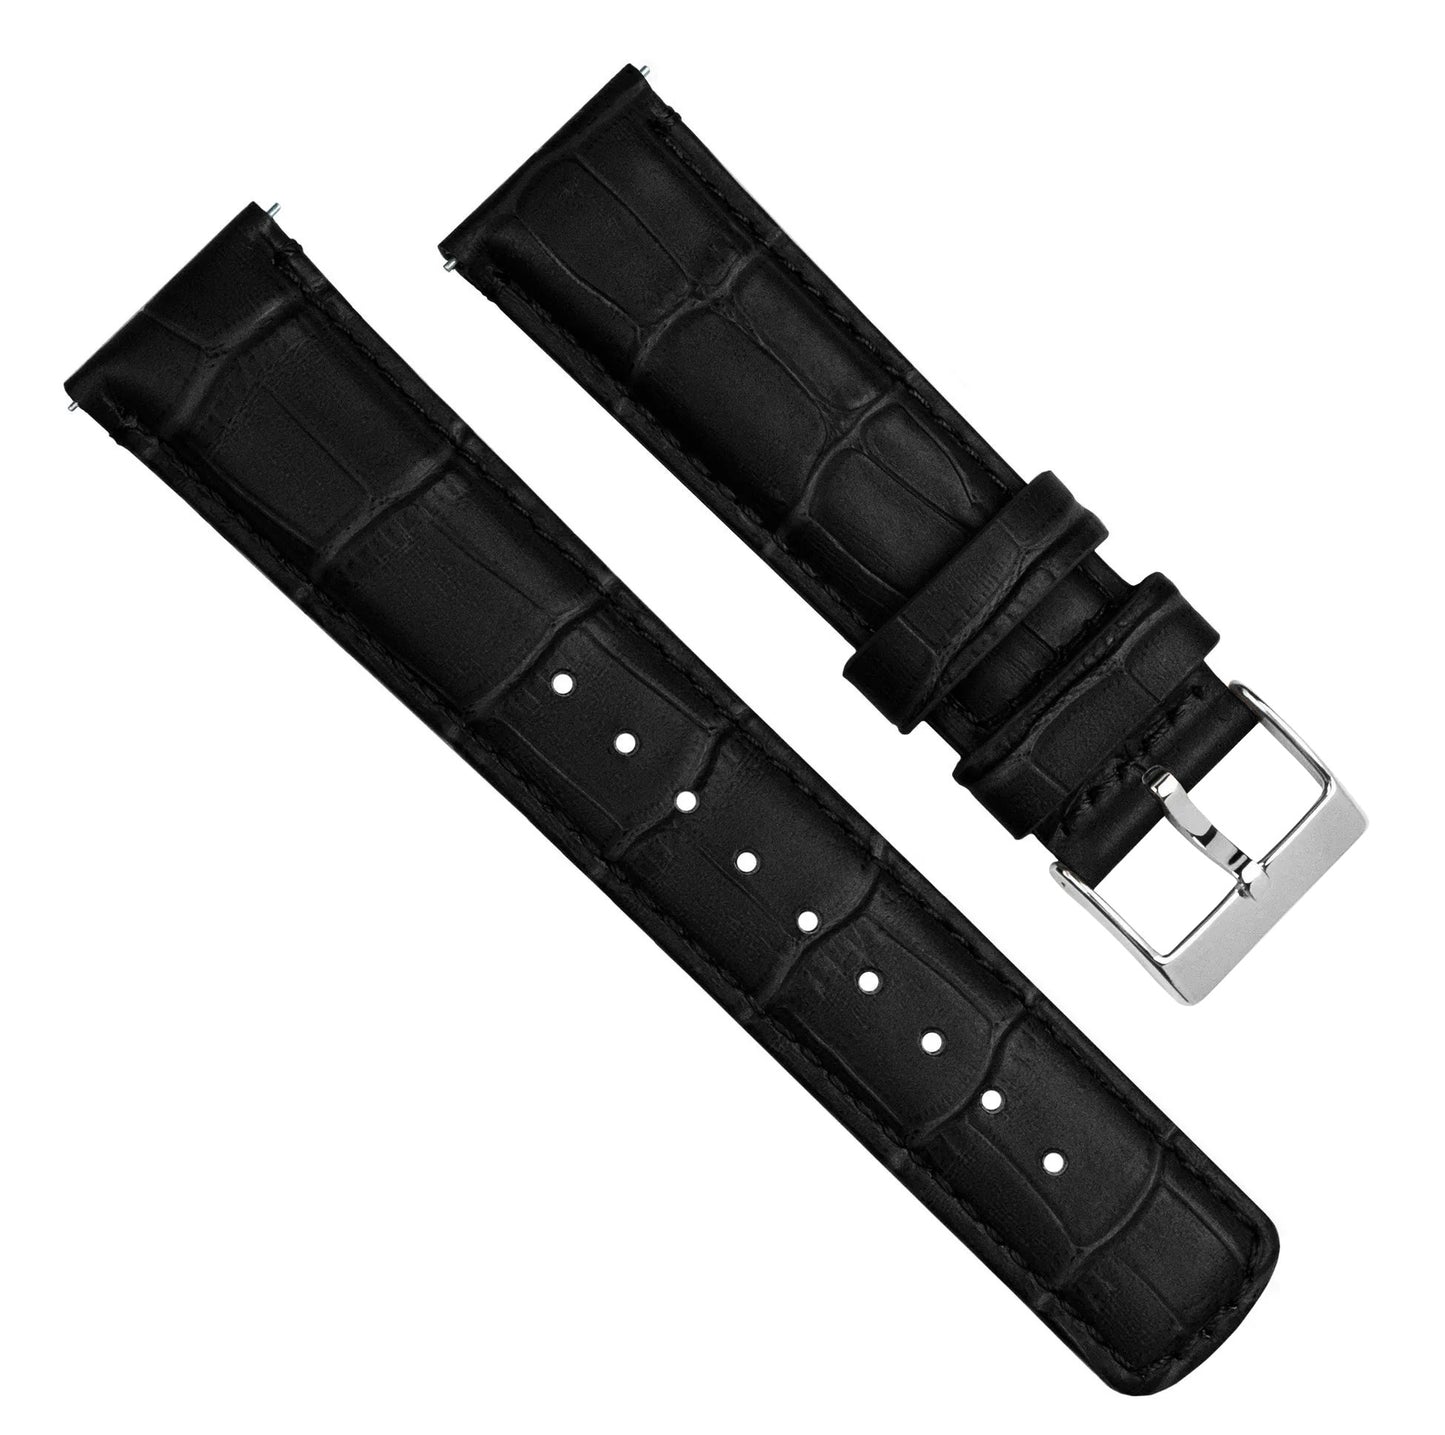 Timex Weekender Expedition Watches Black Alligator Grain Leather Watch Band